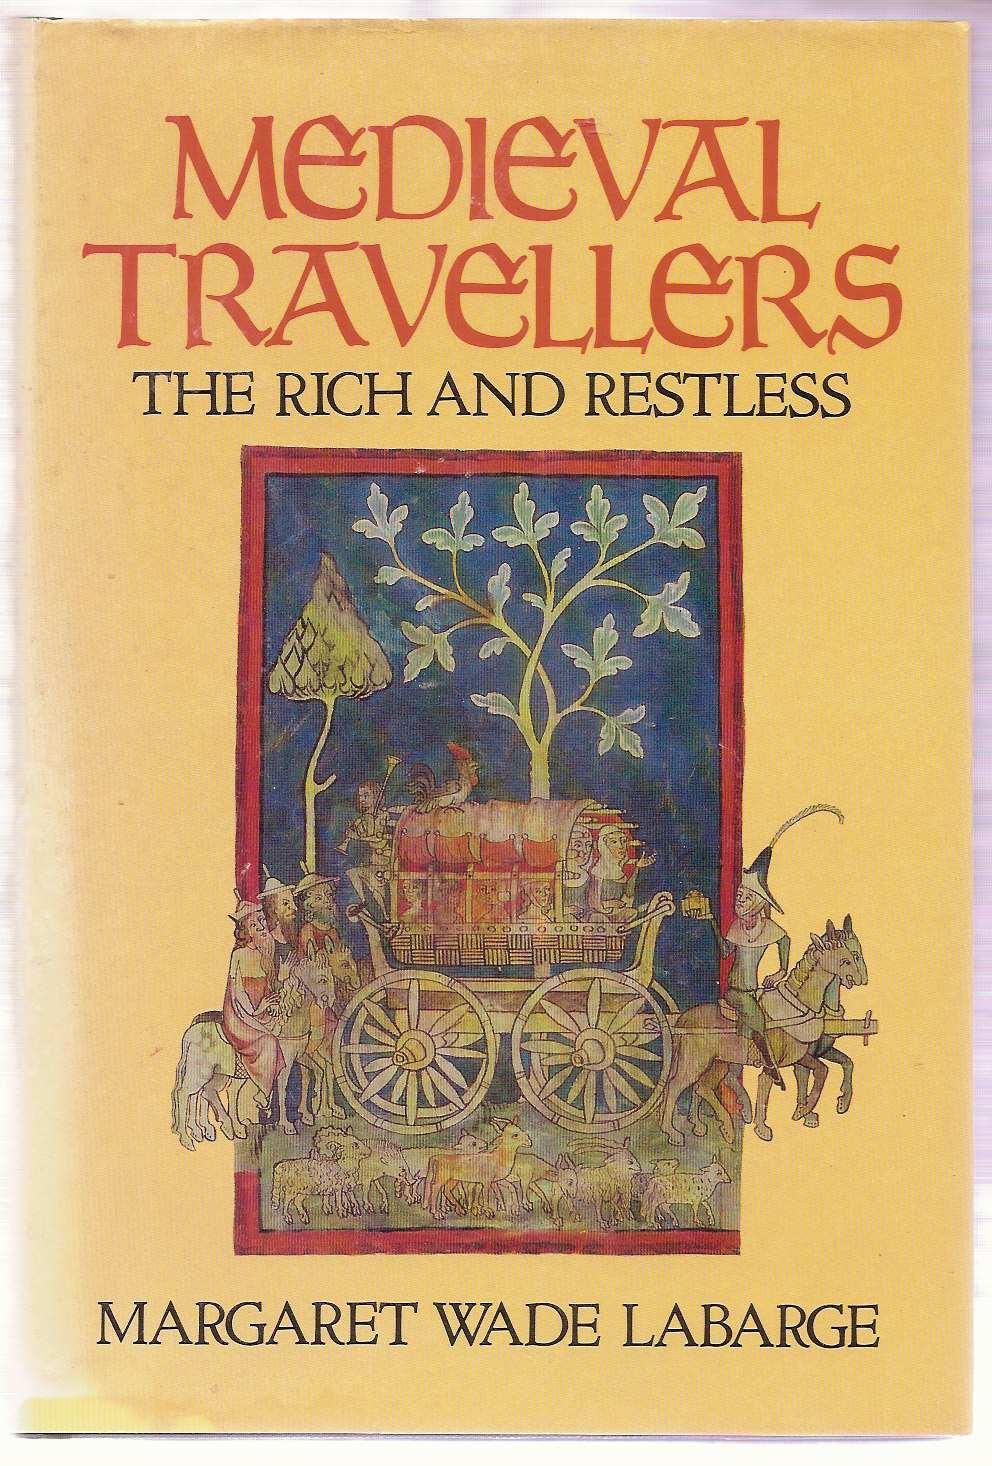 Labarge, Margaret Wade, Medieval travellers: the rich and restless. London: Hamish Hamilton, 1982. Dark blue cloth boards with gilt to spine in price-clipped pictorial dw. Pp. xvi, 237.